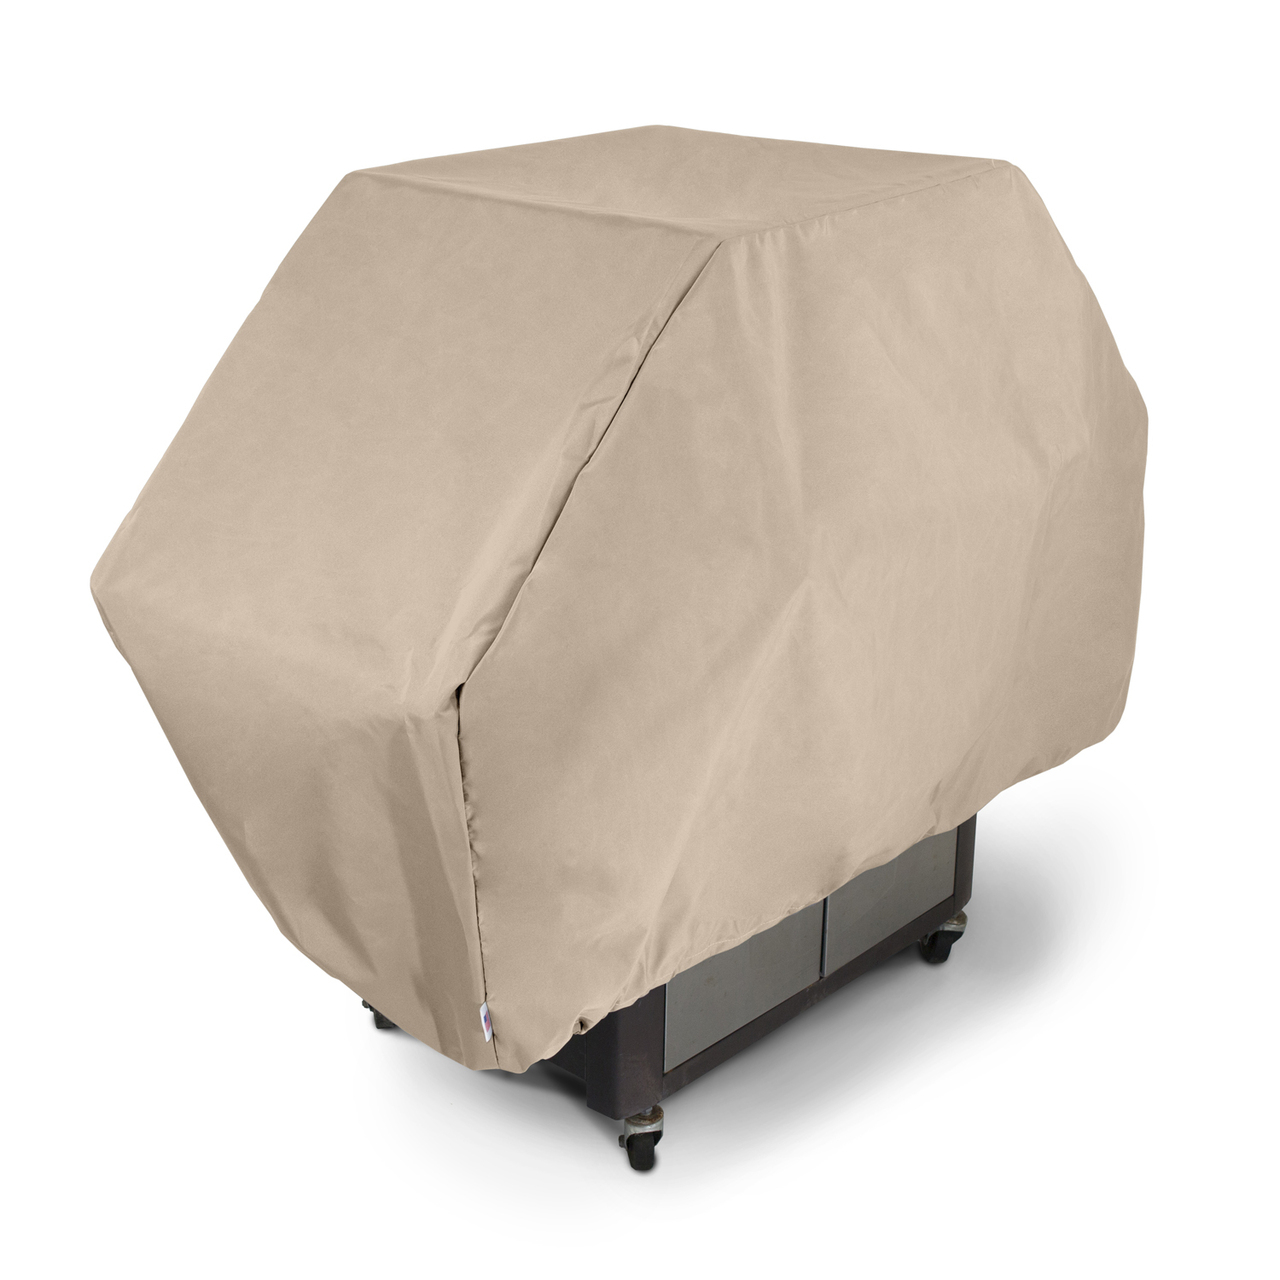 Grill Cover - 59W x 29D x 40H in.